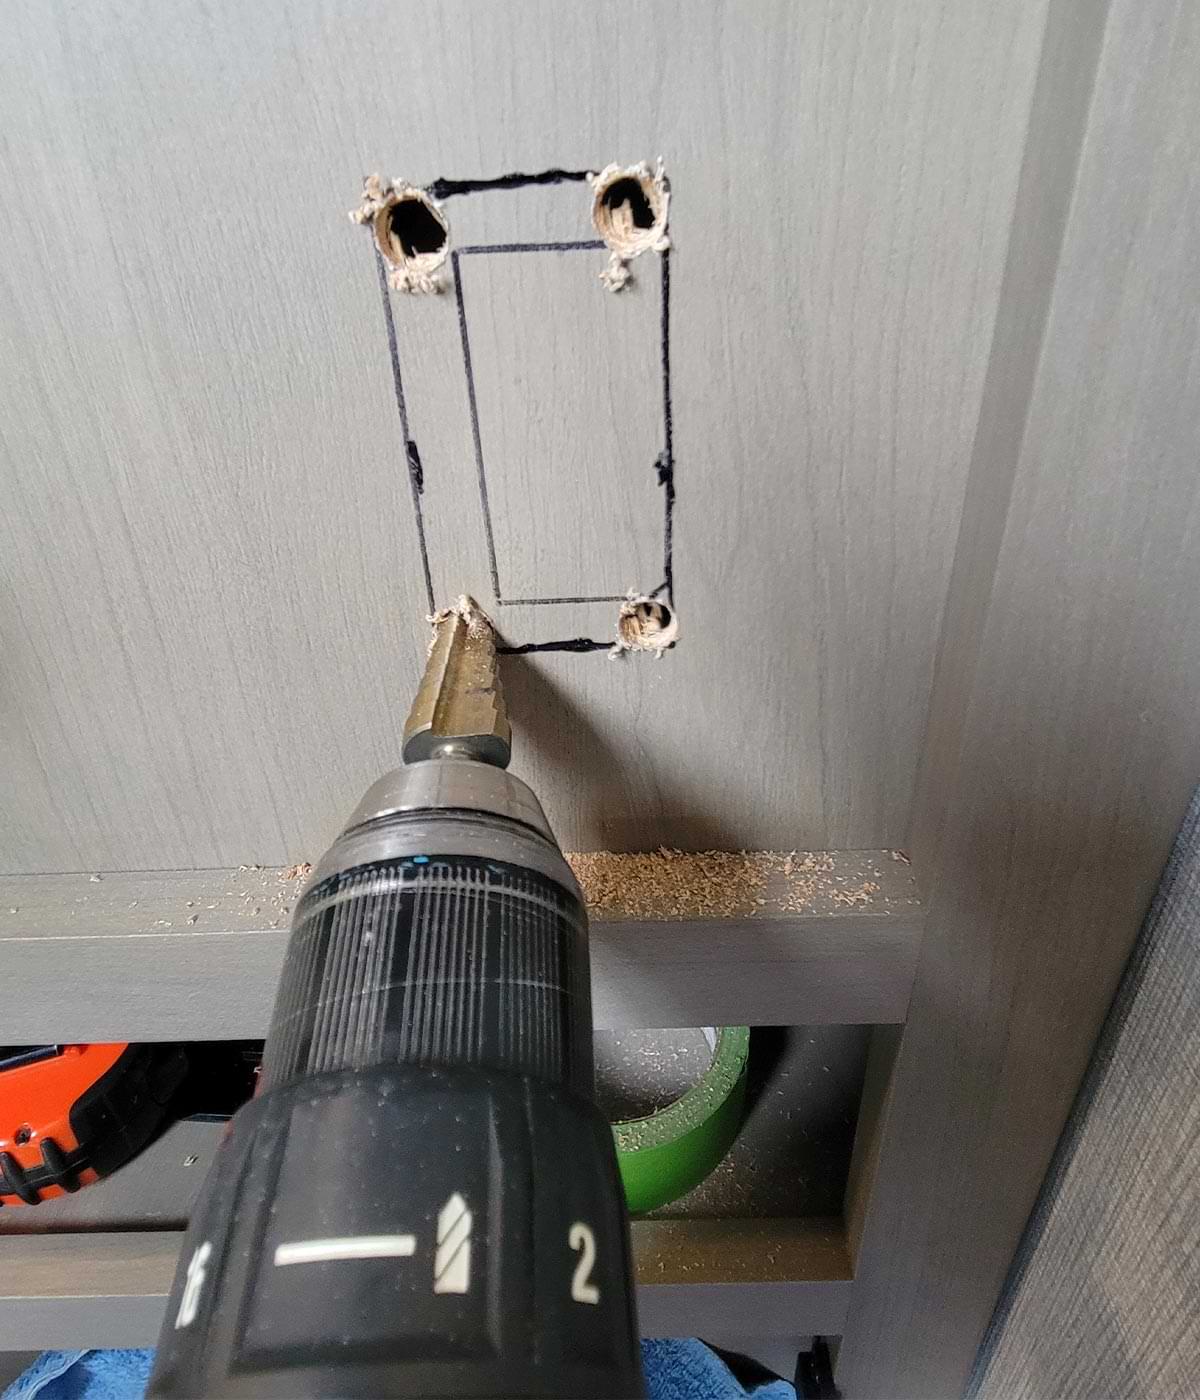 a step-bit is used to drill the four corners for the outlet installation